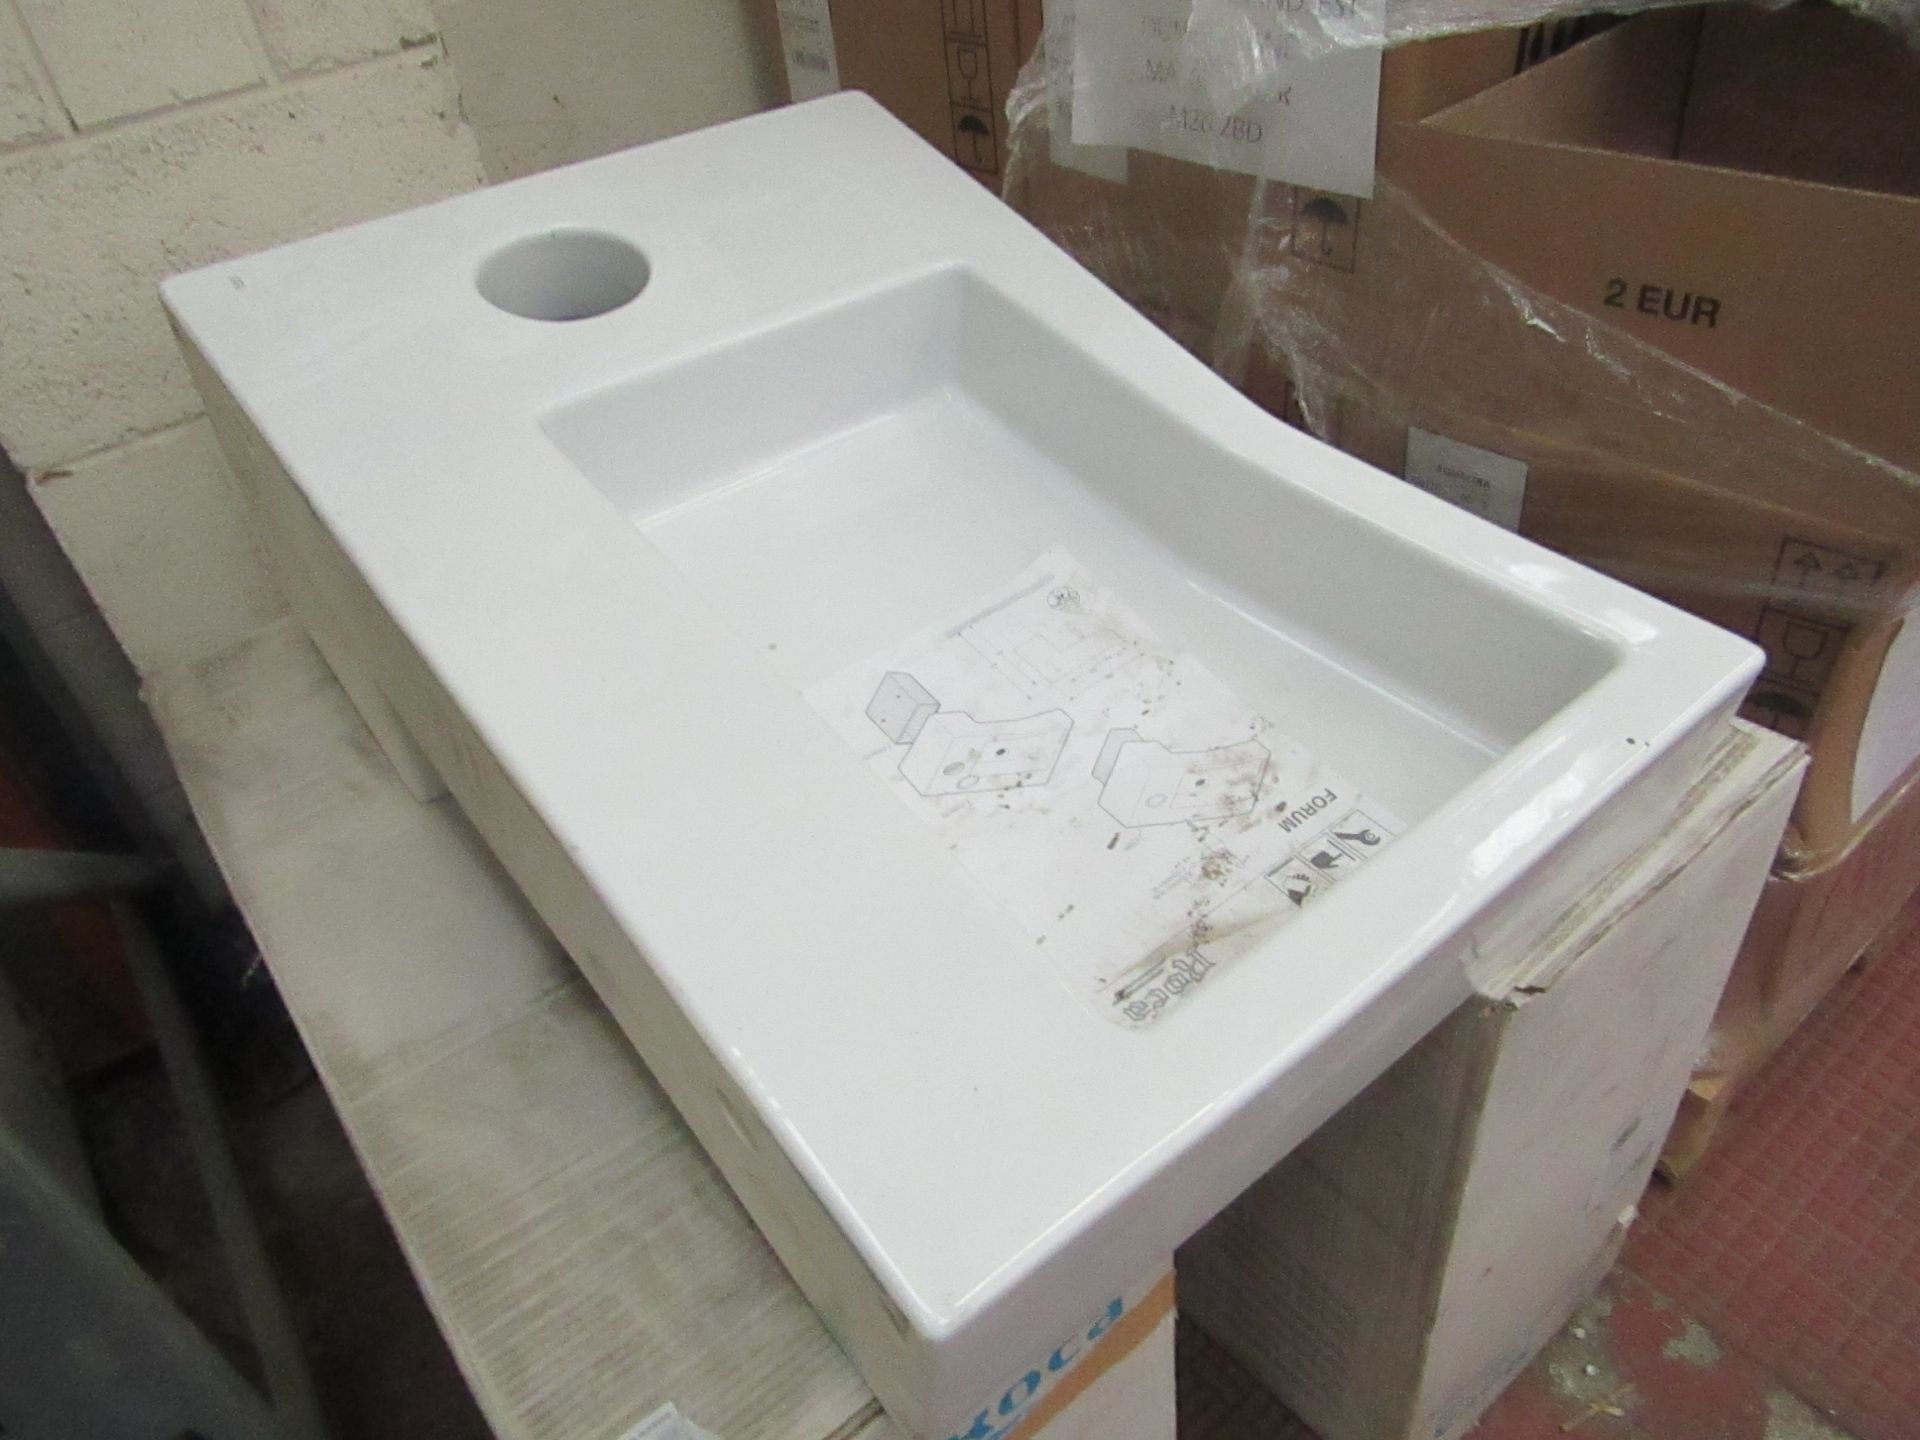 Roca Forum 800mm wall mounted sink with side space and hole for Bin, new and boxed, Rprt £499